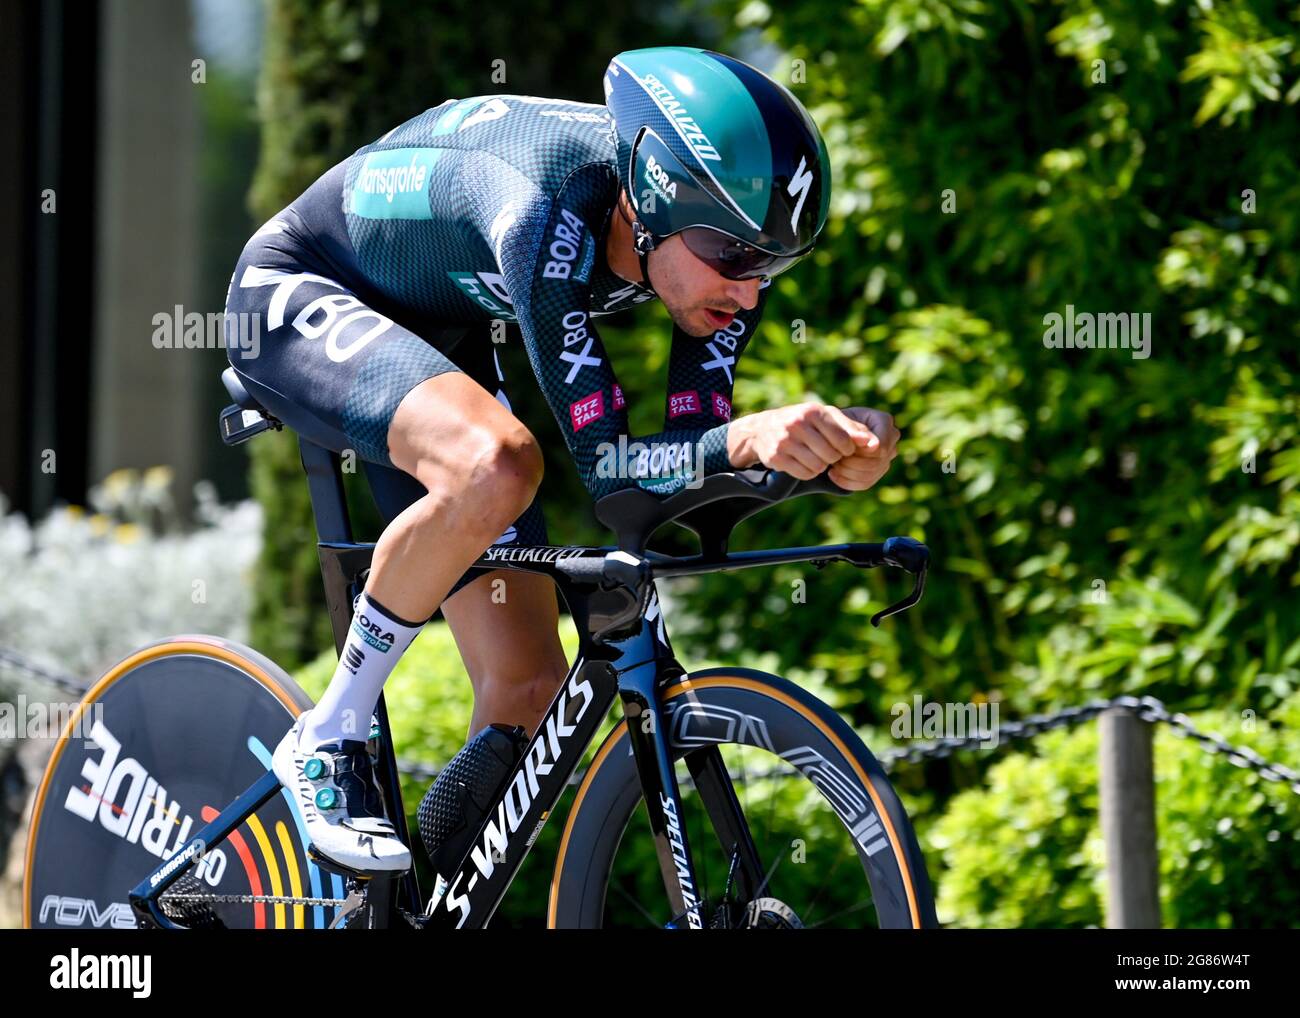 LIBOURNE to SAINT-EMILION , France, 17 July 2021, bora hansgrohe rider Emanuel  BUCHMANN during the stage 20 time trial , Credit:David Stockman/Pool/Goding Images/Alamy Live News Stock Photo